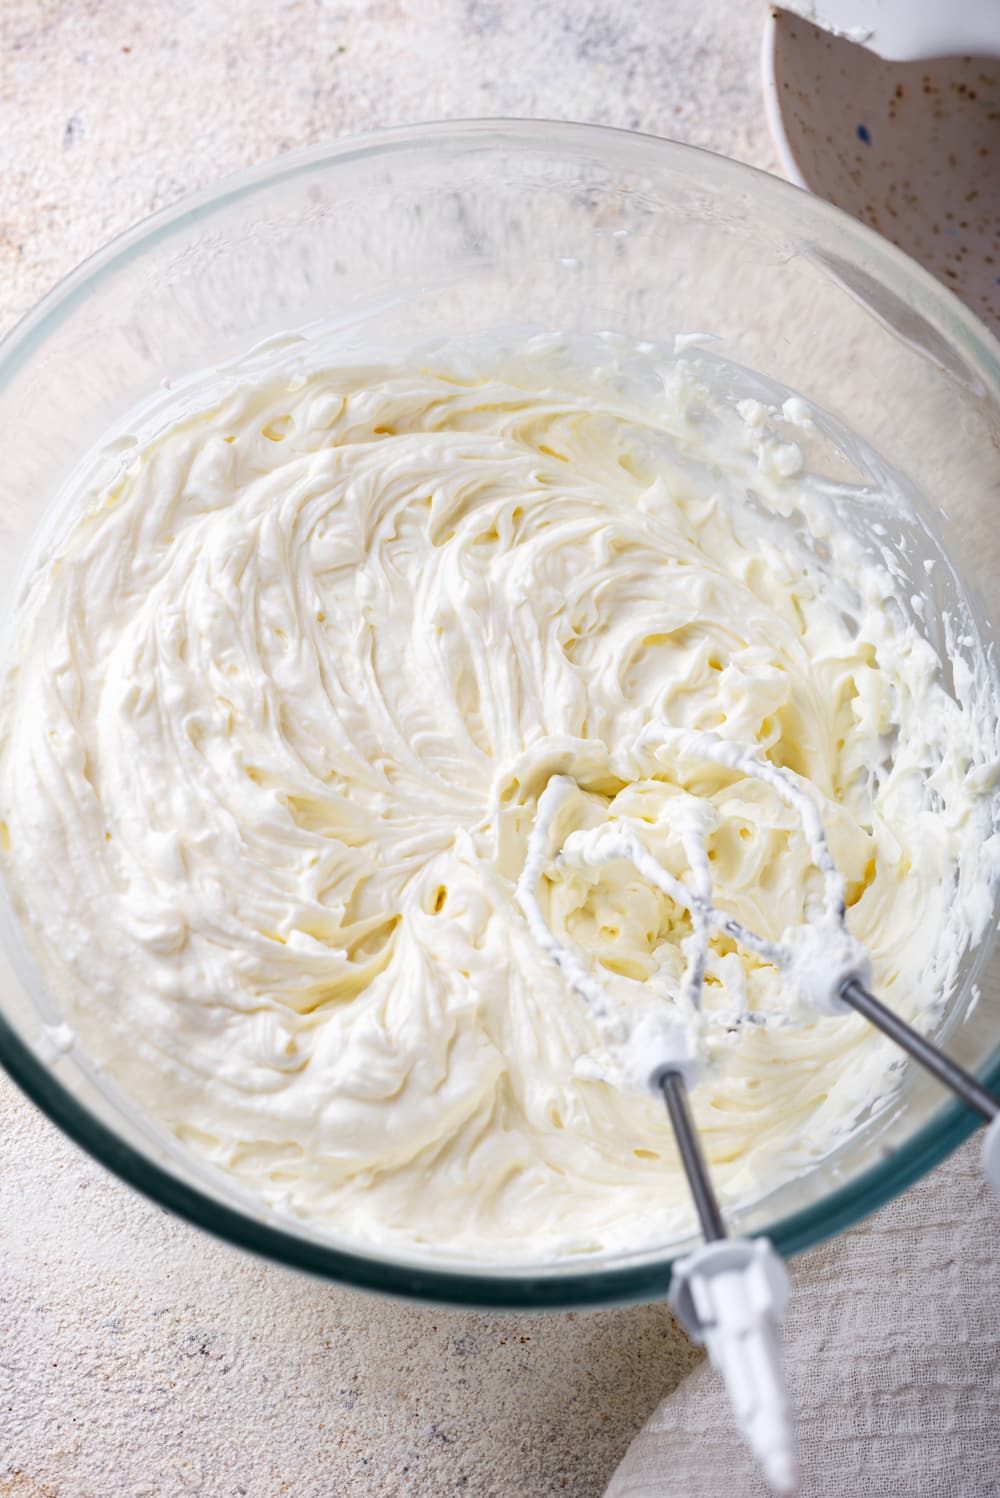 A glass bowl of whipped keto cream cheese frosting. The head of the mixers are in the frosting and the stems are leaning against the front side of the bowl.